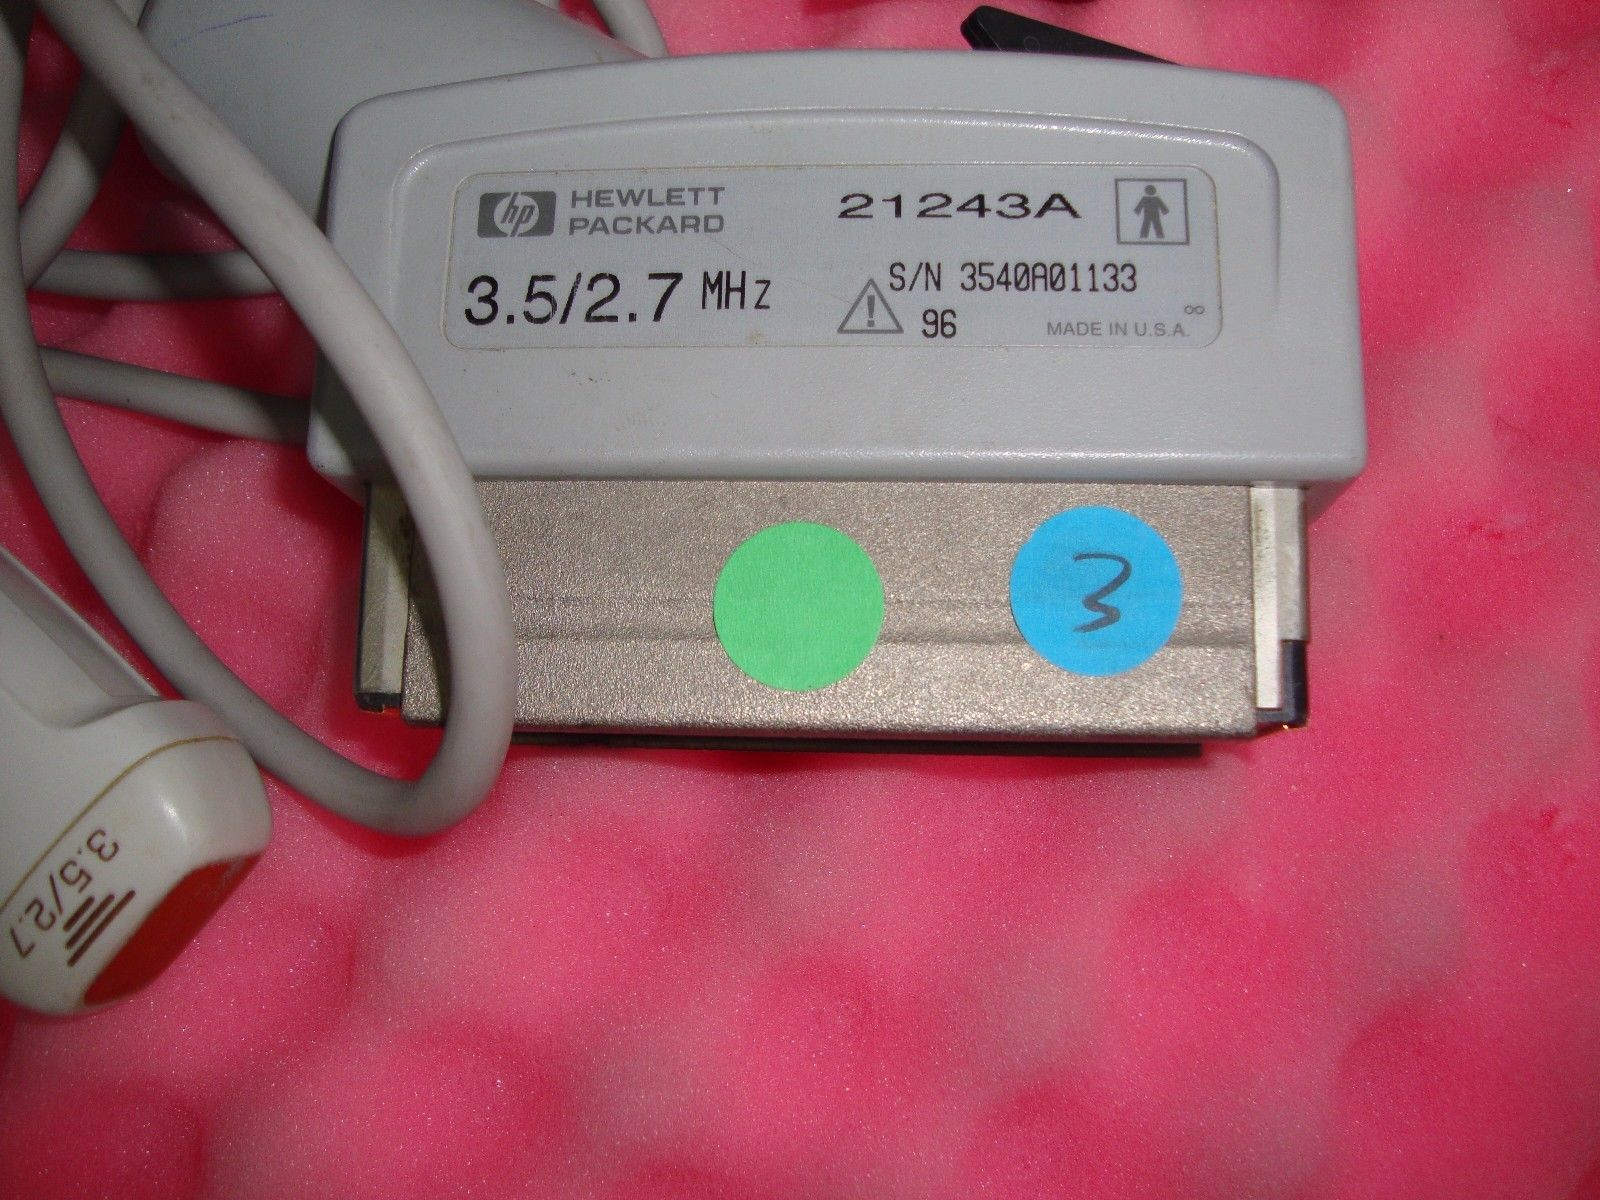 a close up of a device with wires attached to it